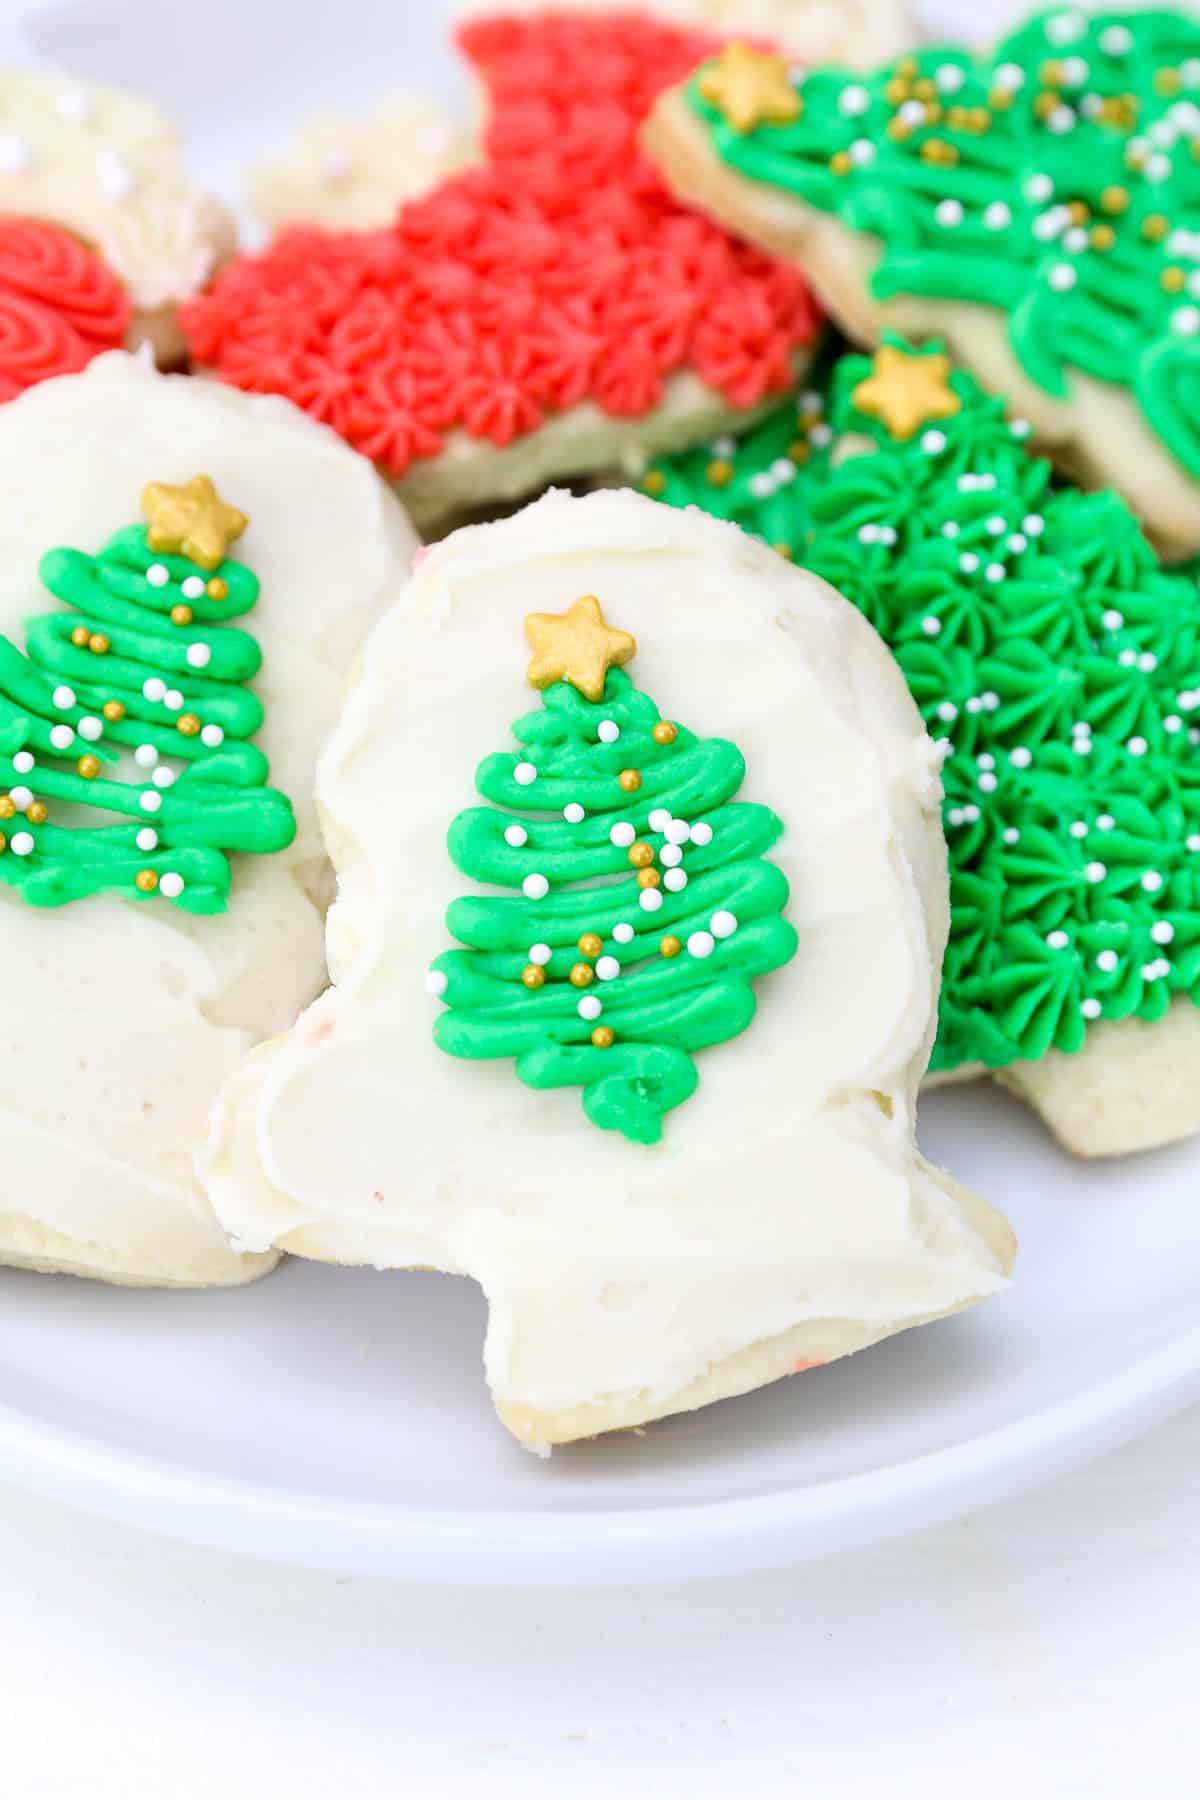 A glove shaped sugar cookie decorated with white frosting and a Christmas tree